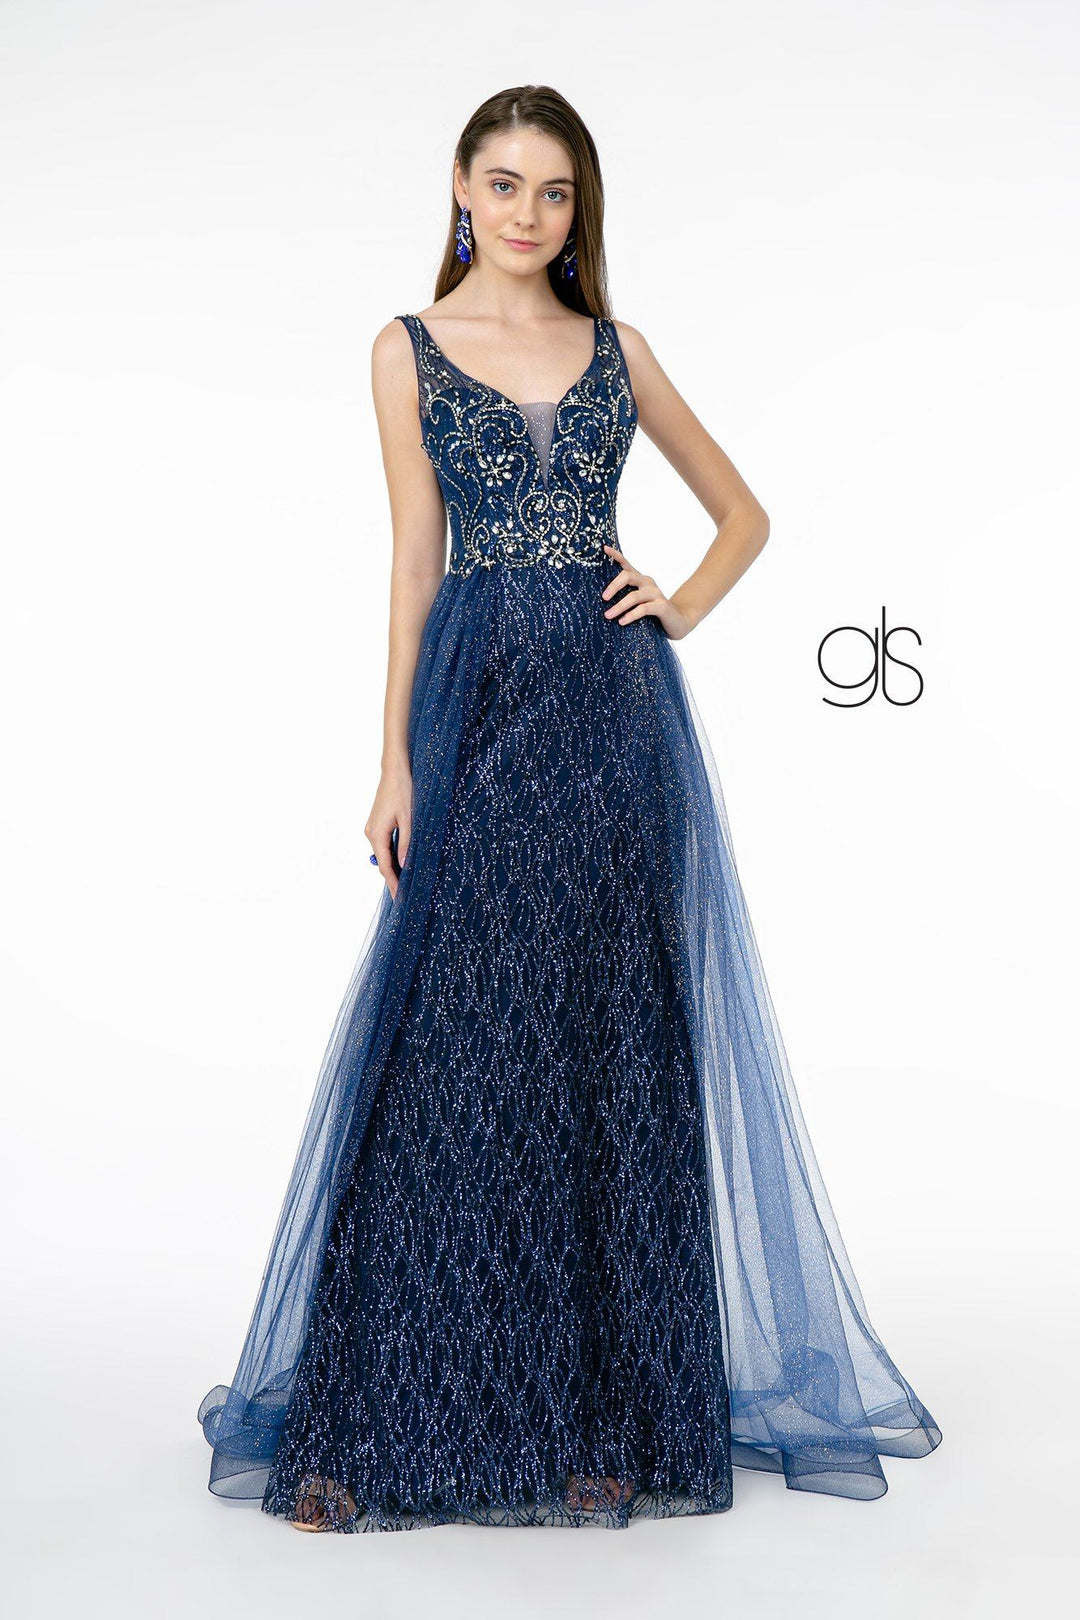 Jeweled V-Neck Gown with Glitter Overskirt by Elizabeth K GL1840